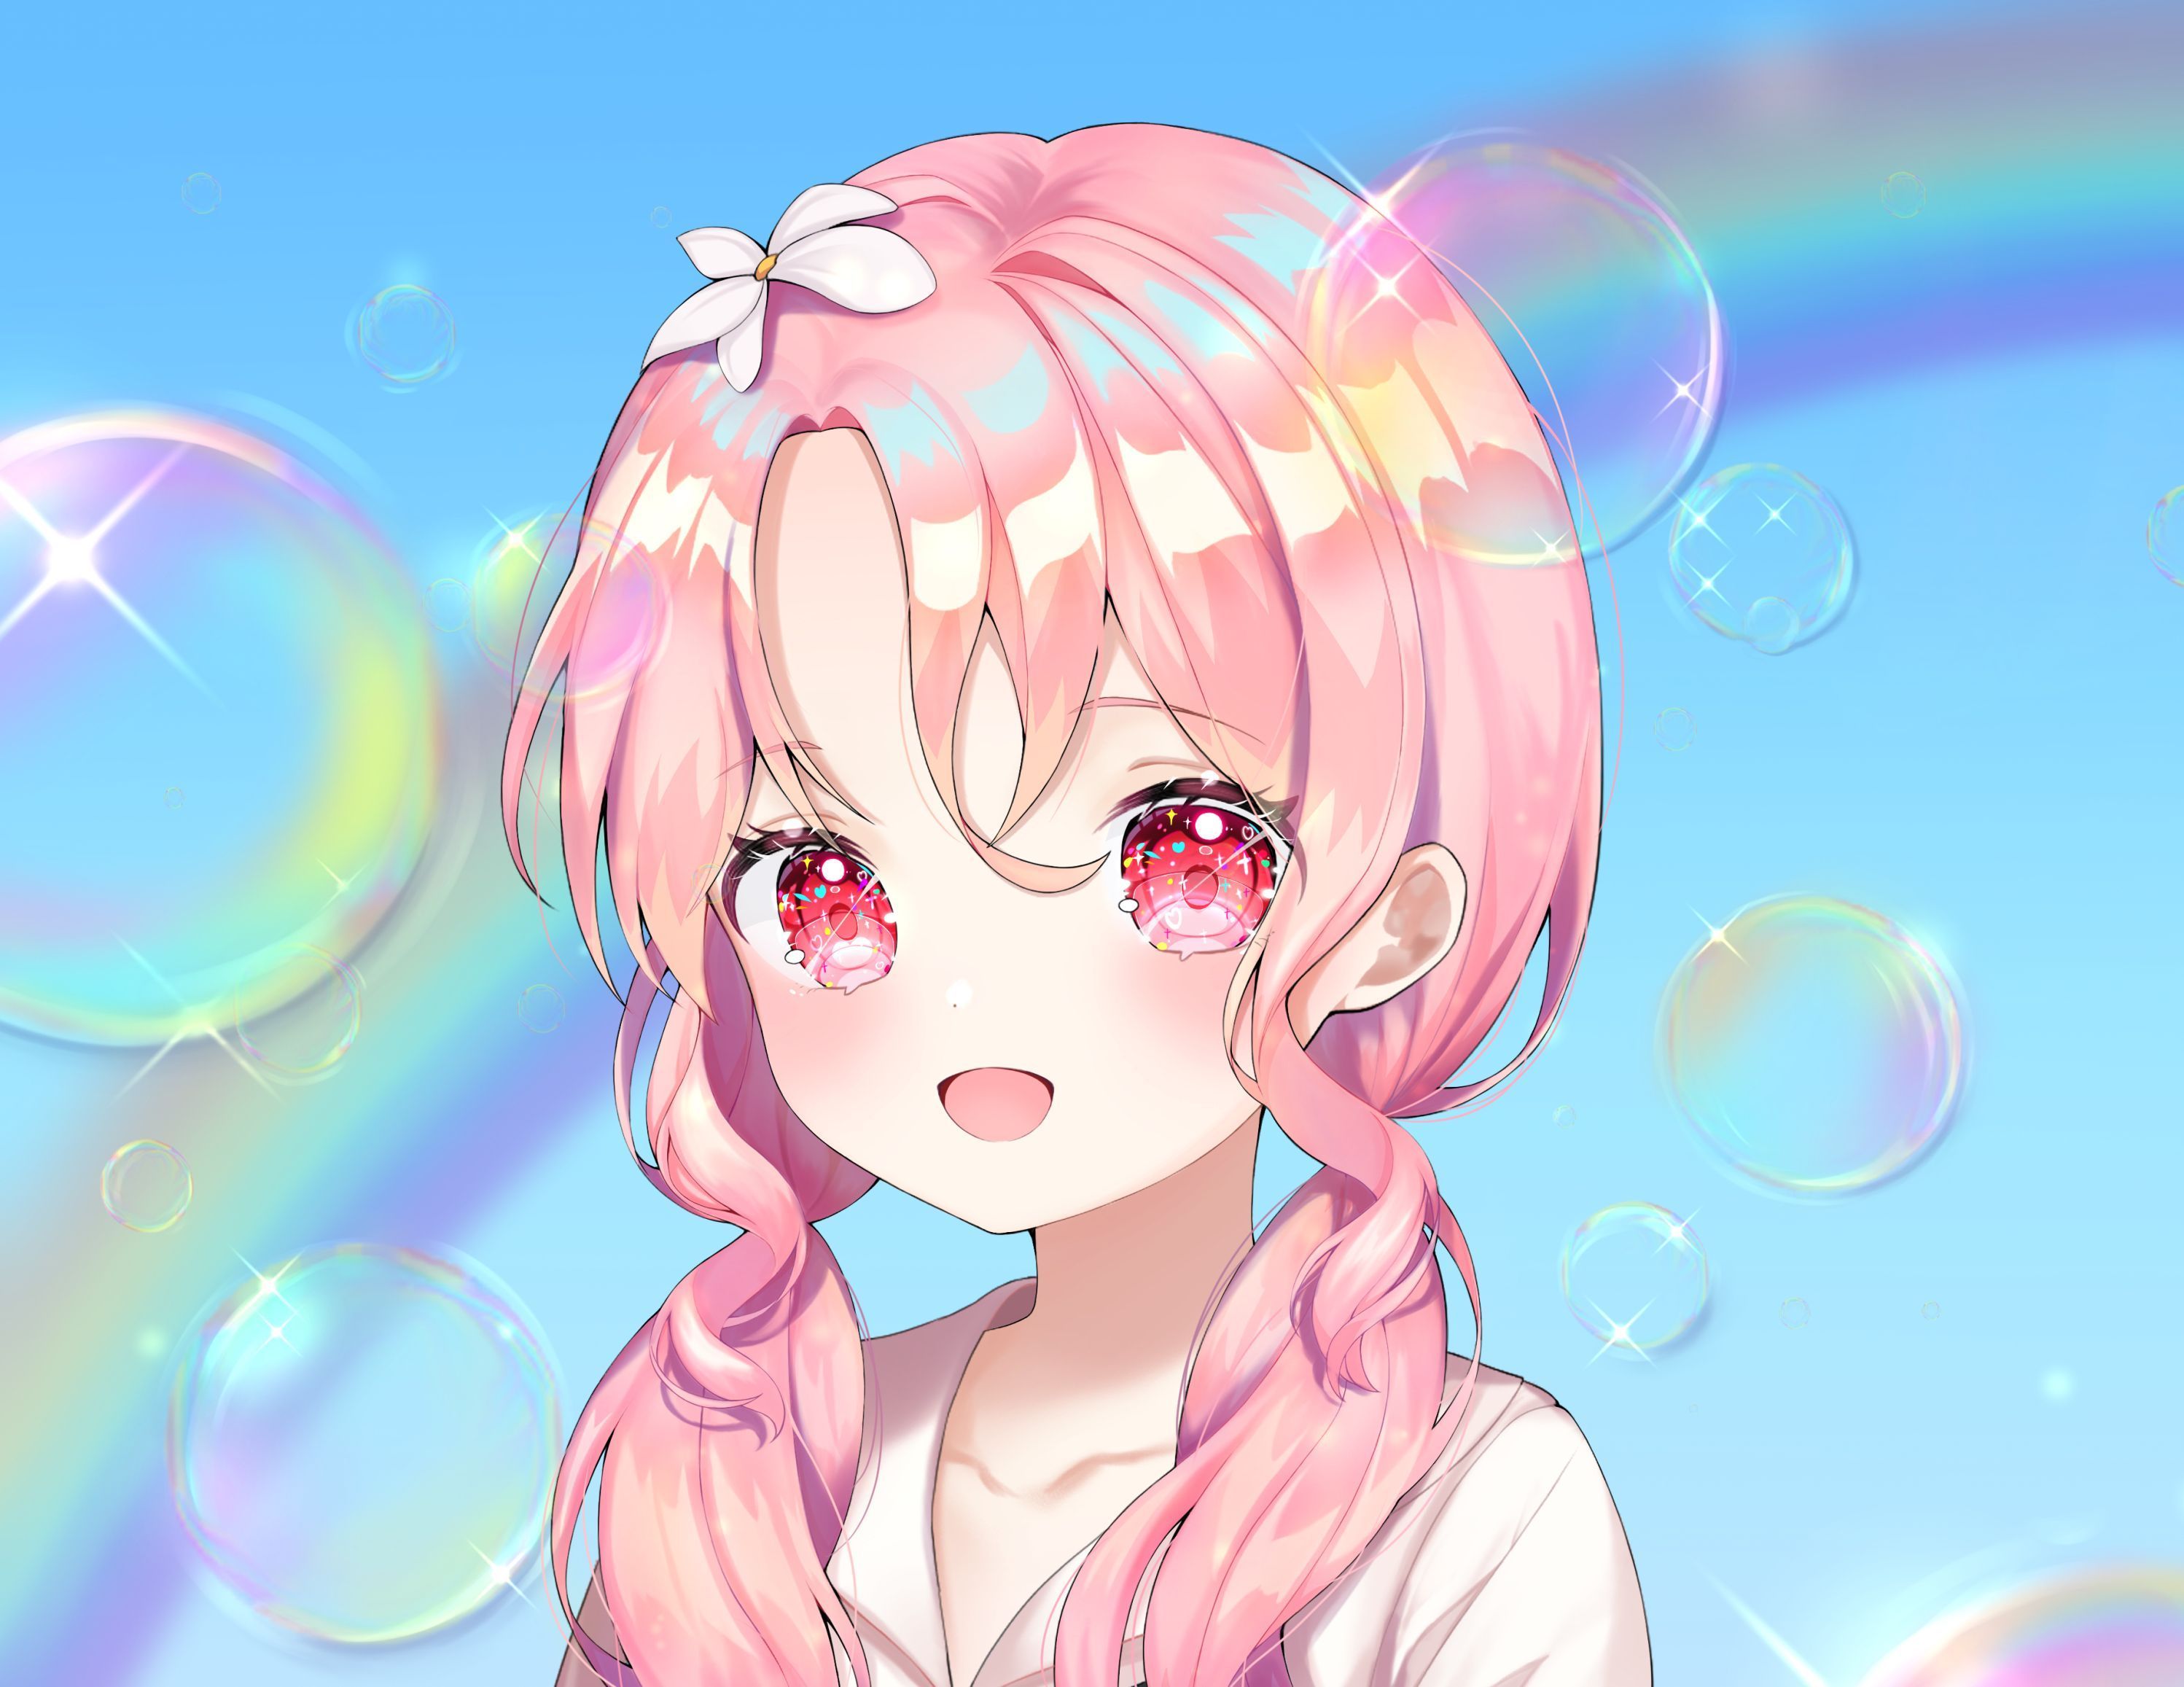 An anime girl with pink hair and red eyes stands in front of a rainbow and soap bubbles. - My Melody